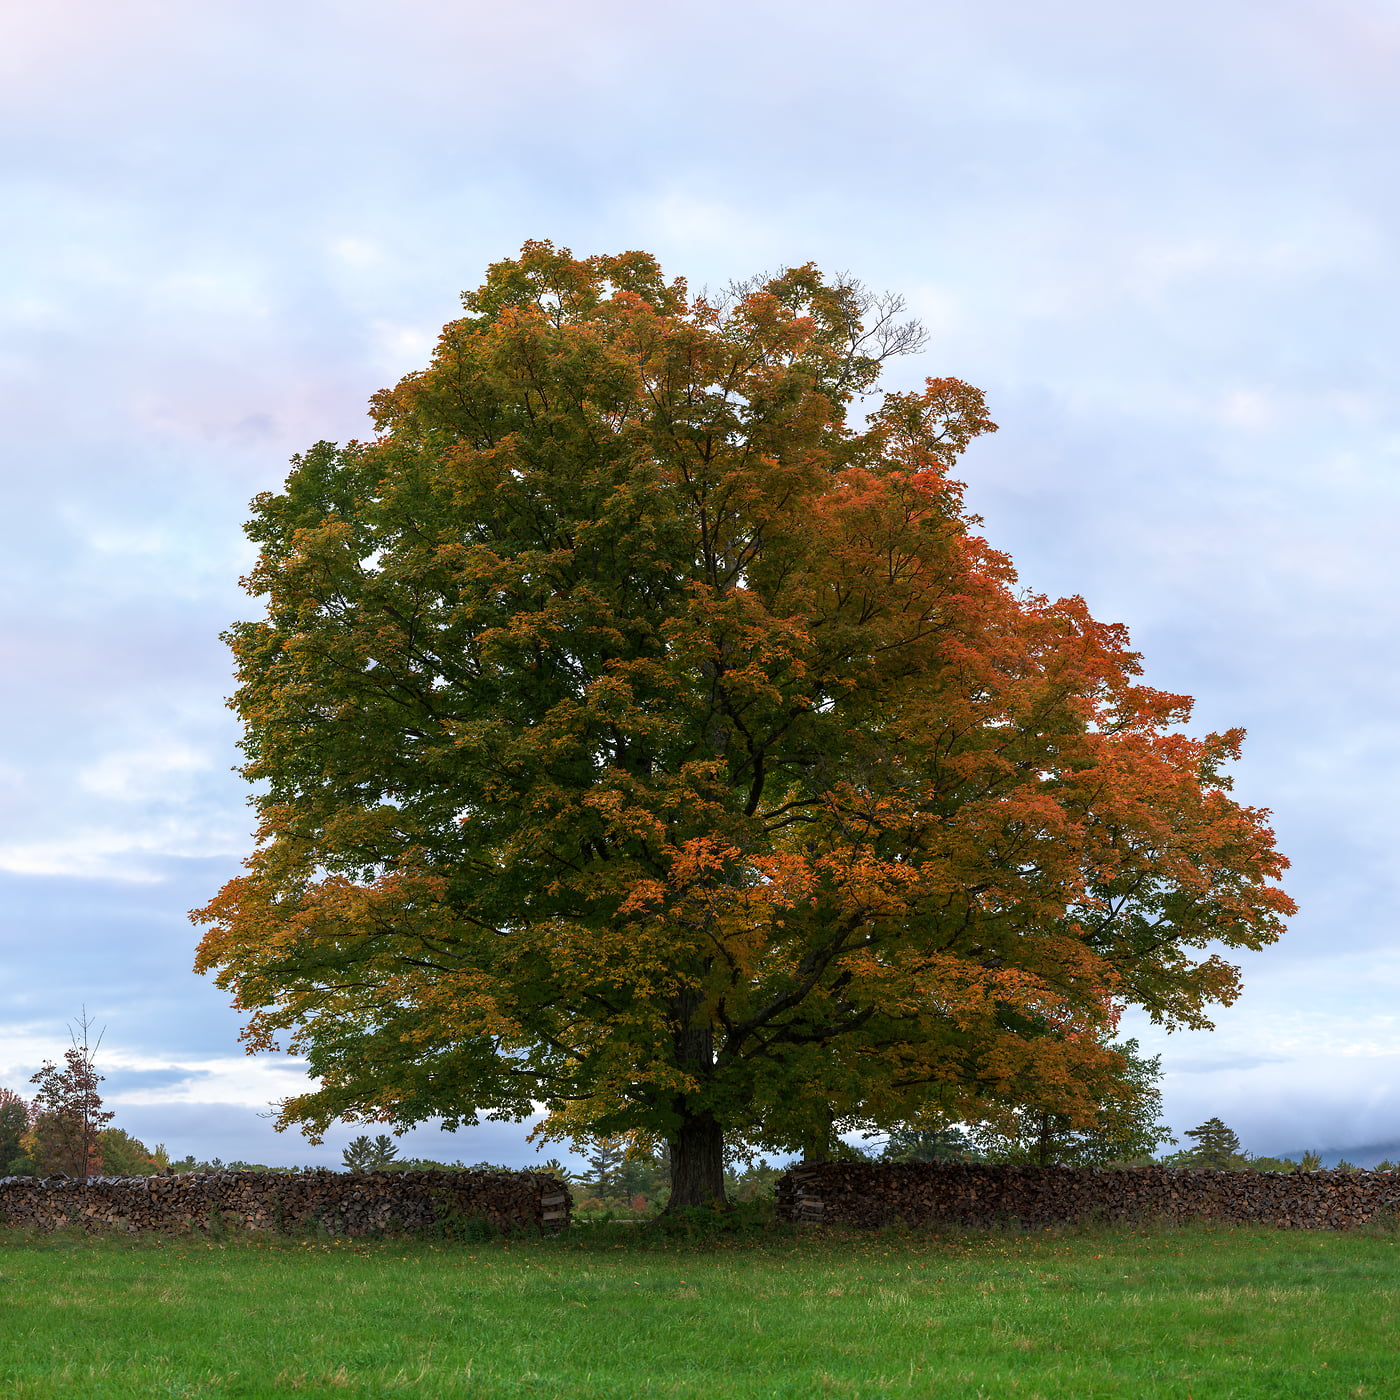 1,244 megapixels! A very high resolution, large-format VAST photo print of a maple tree on a farm in autumn; nature photograph created by Aaron Priest in Muster Field Farm, North Sutton, New Hampshire